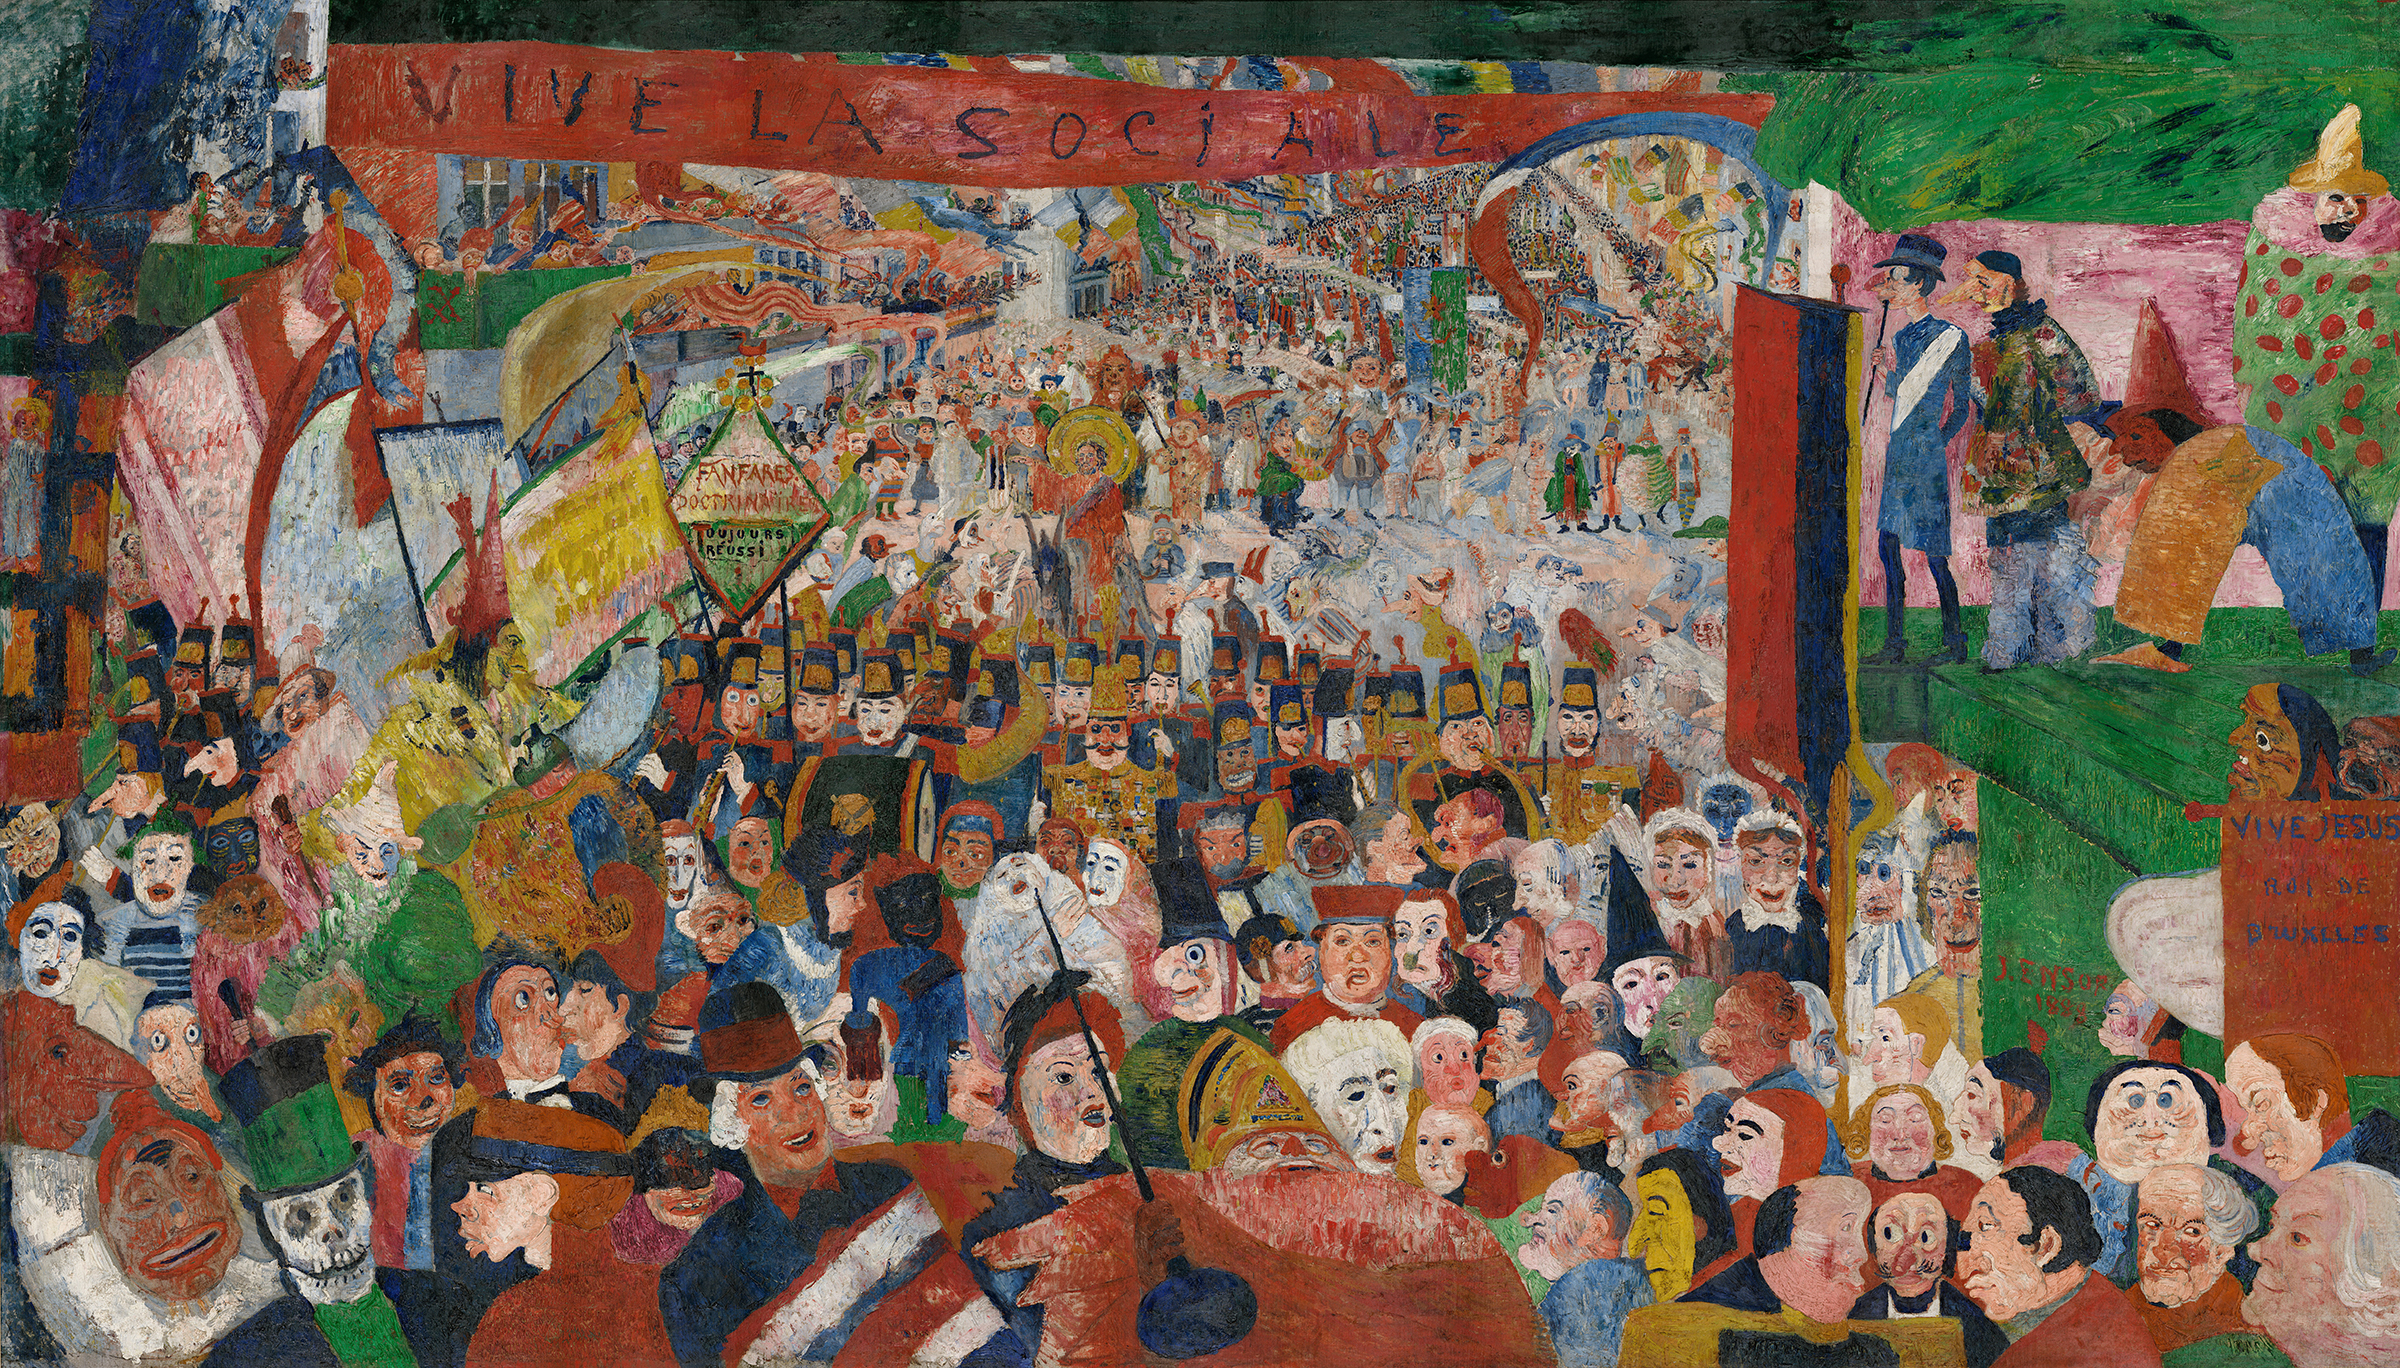 James Ensor, Christ’s Entry into Brussels in 1889, 1888, oil on canvas, 99 1/2 x 169 1/2 inches (J. Paul Getty Museum, Los Angeles)